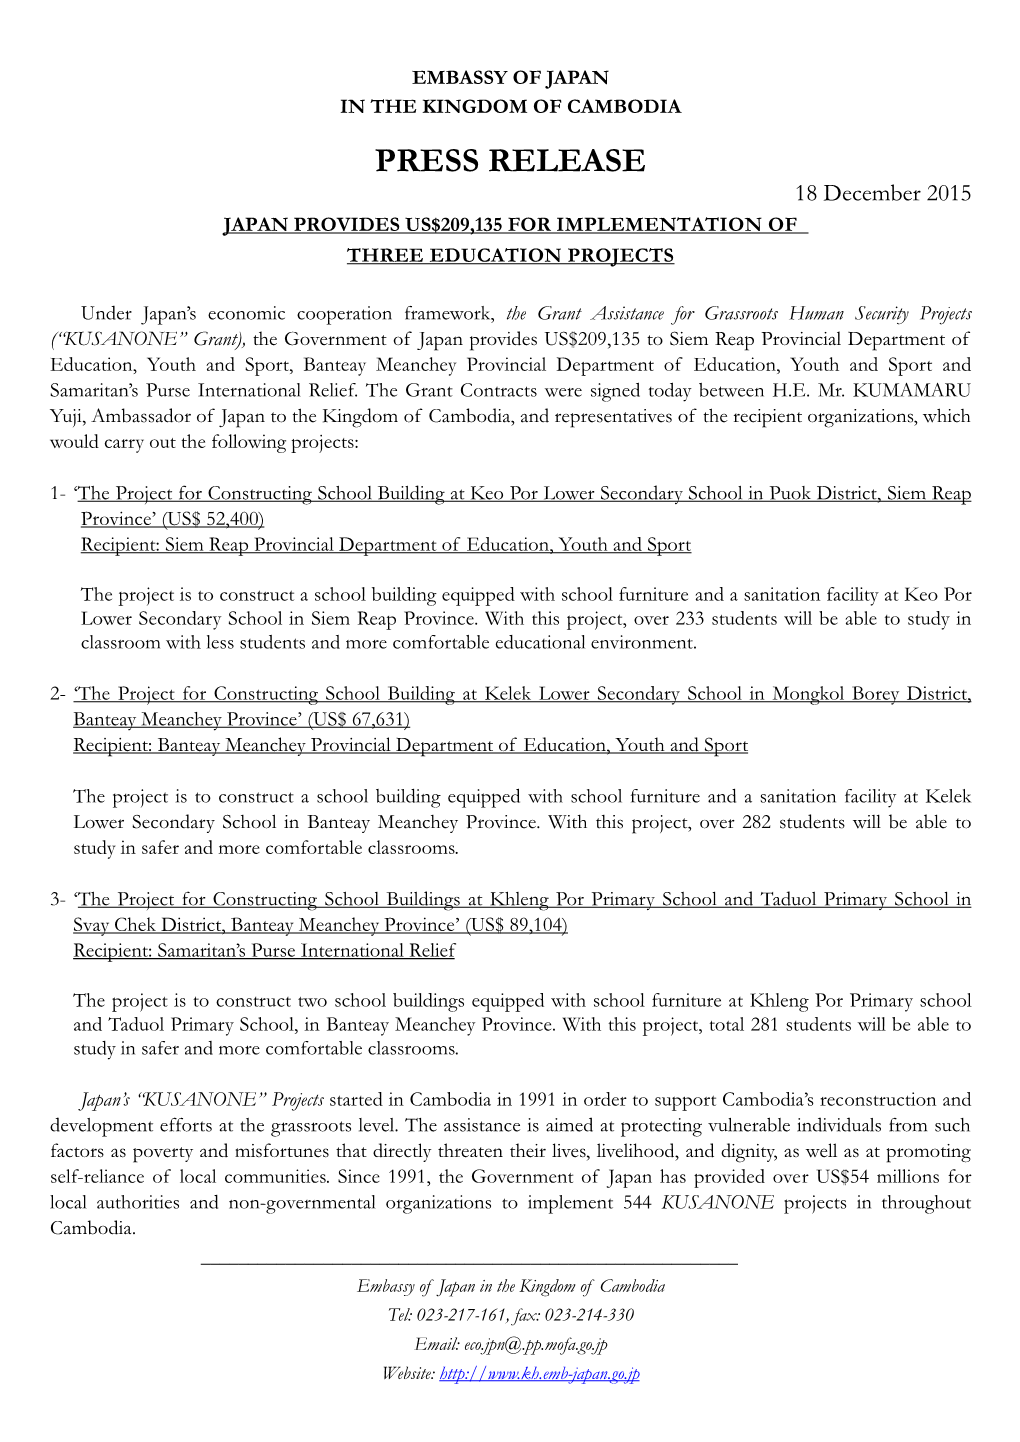 PRESS RELEASE 18 December 2015 JAPAN PROVIDES US$209,135 for IMPLEMENTATION of THREE EDUCATION PROJECTS